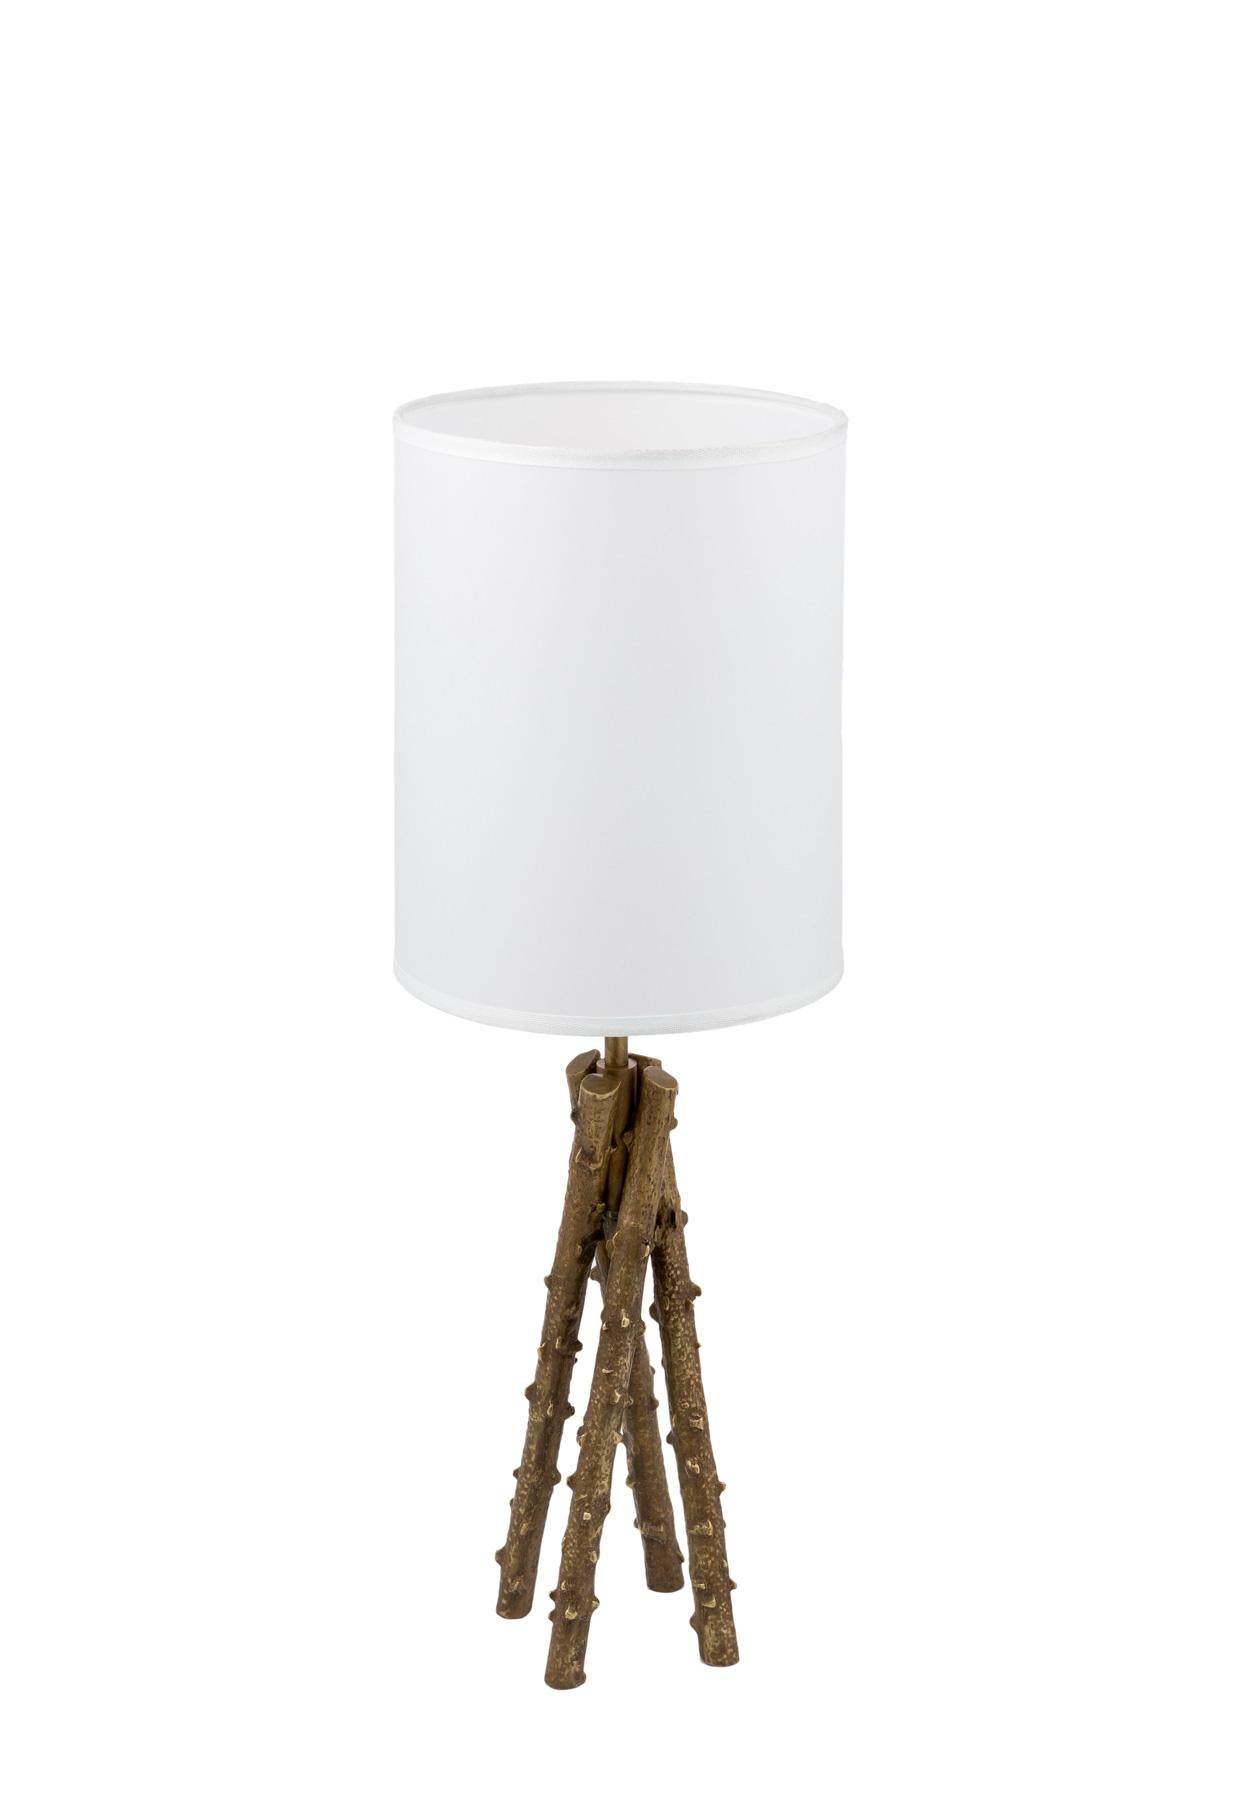 Cast Rosa Canina small brass table lamp For Sale